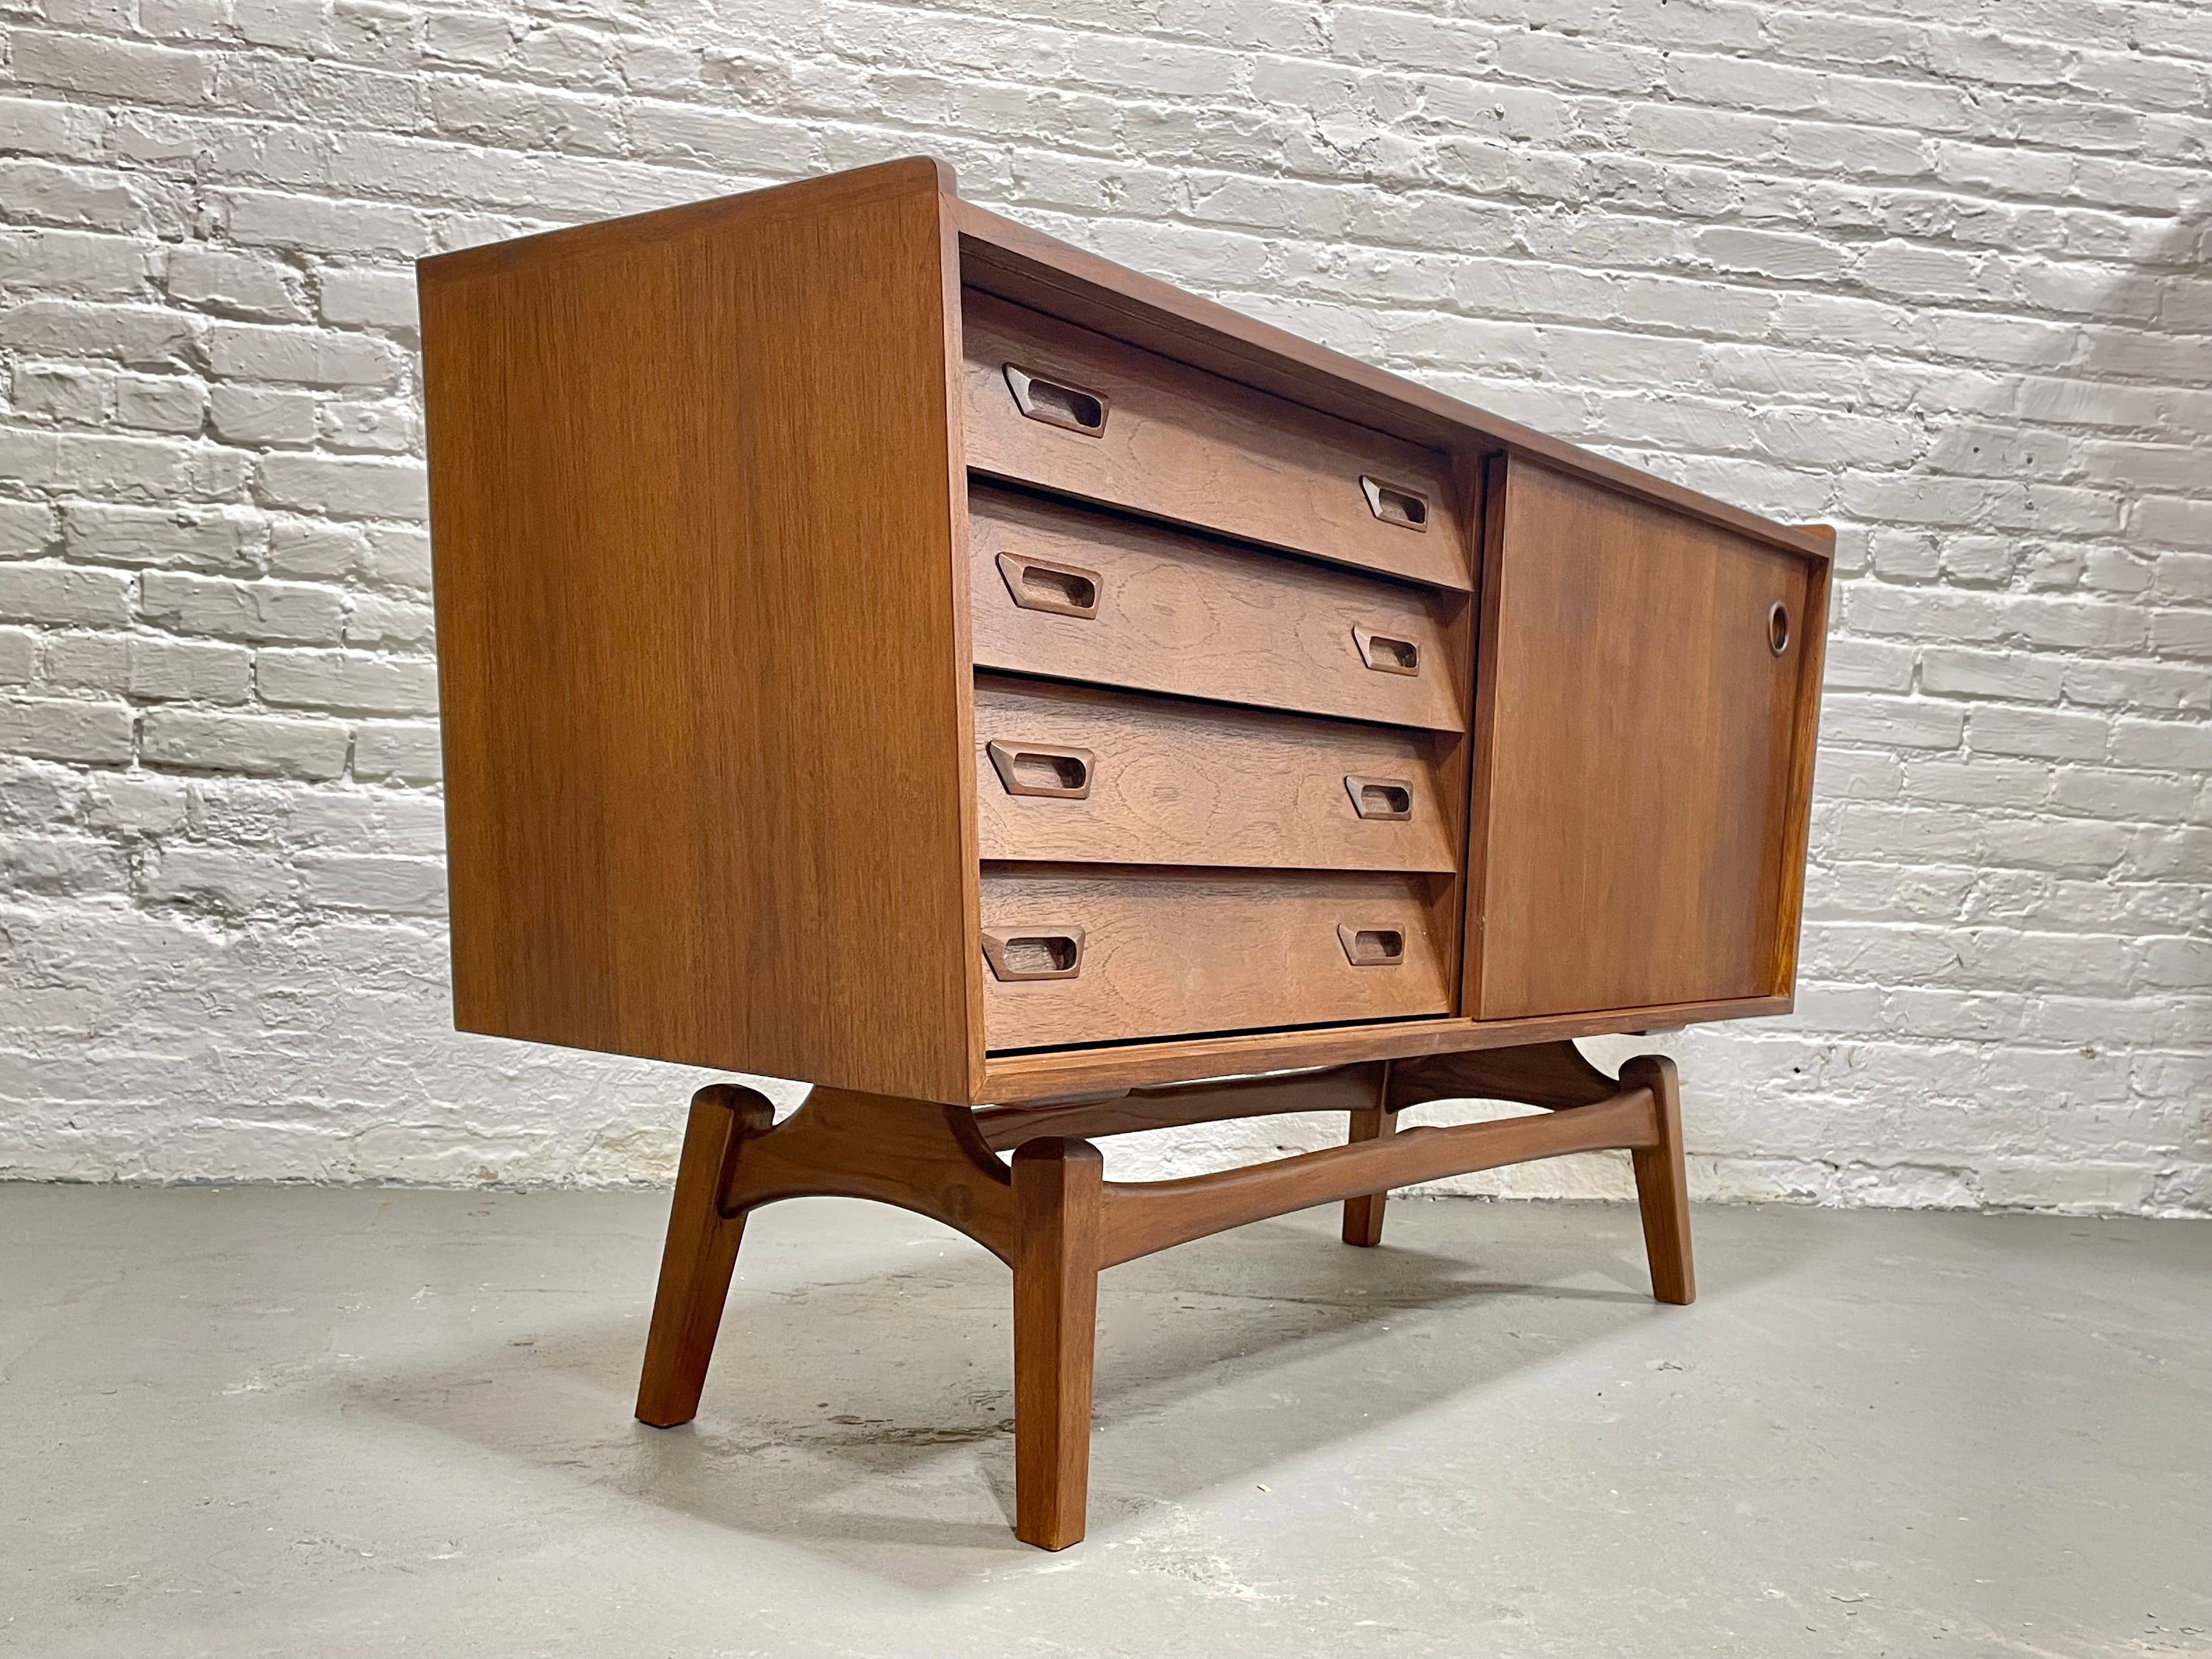 Apartment Sized DANISH Mid Century MODERN styled CREDENZA / Media Stand / Sideboard